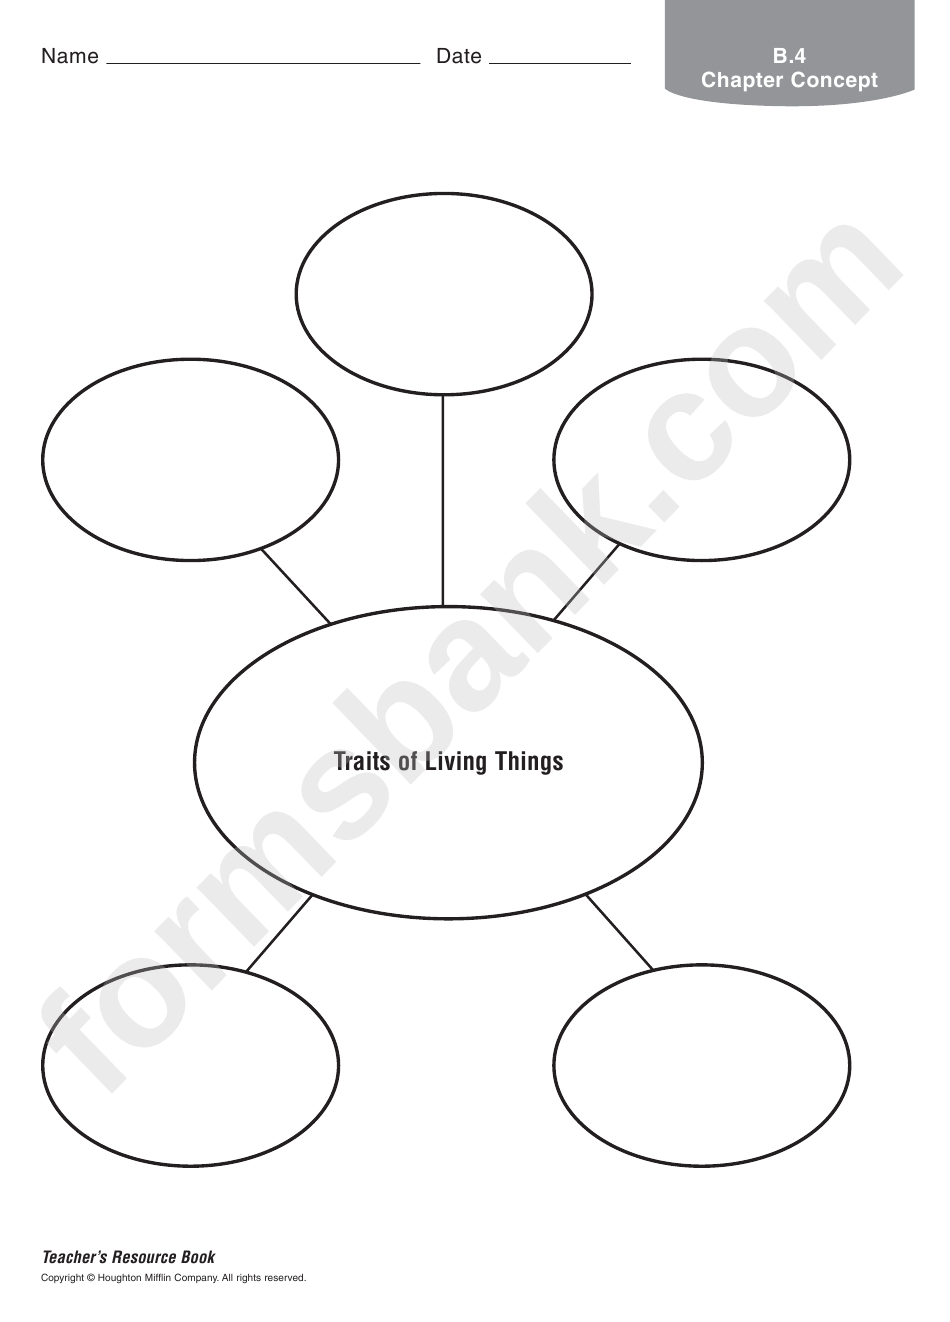 Traits Of Living Things Organizer Template